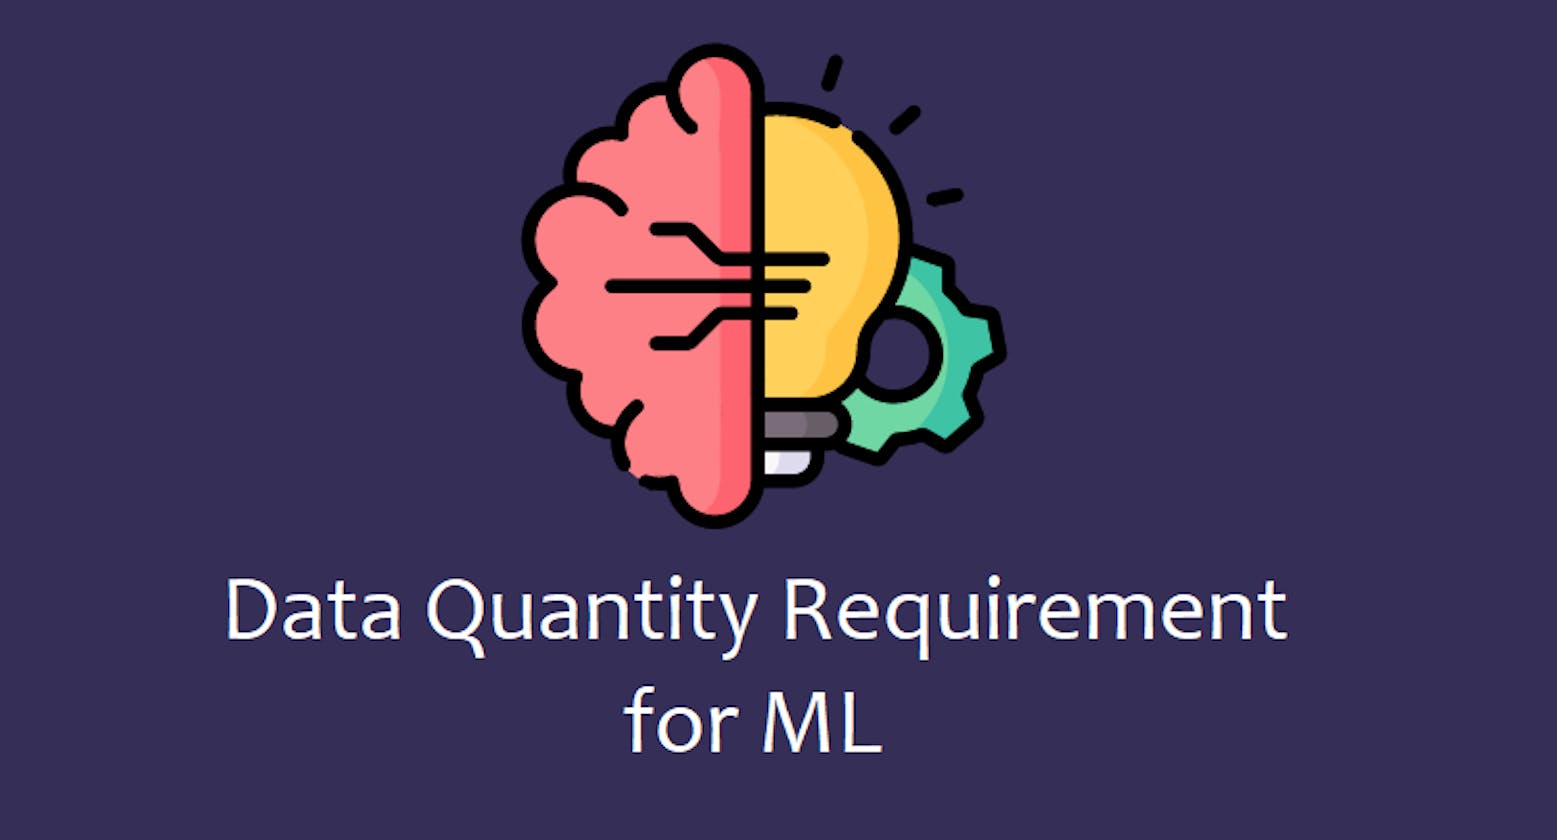 Data Quantity Requirement for ML